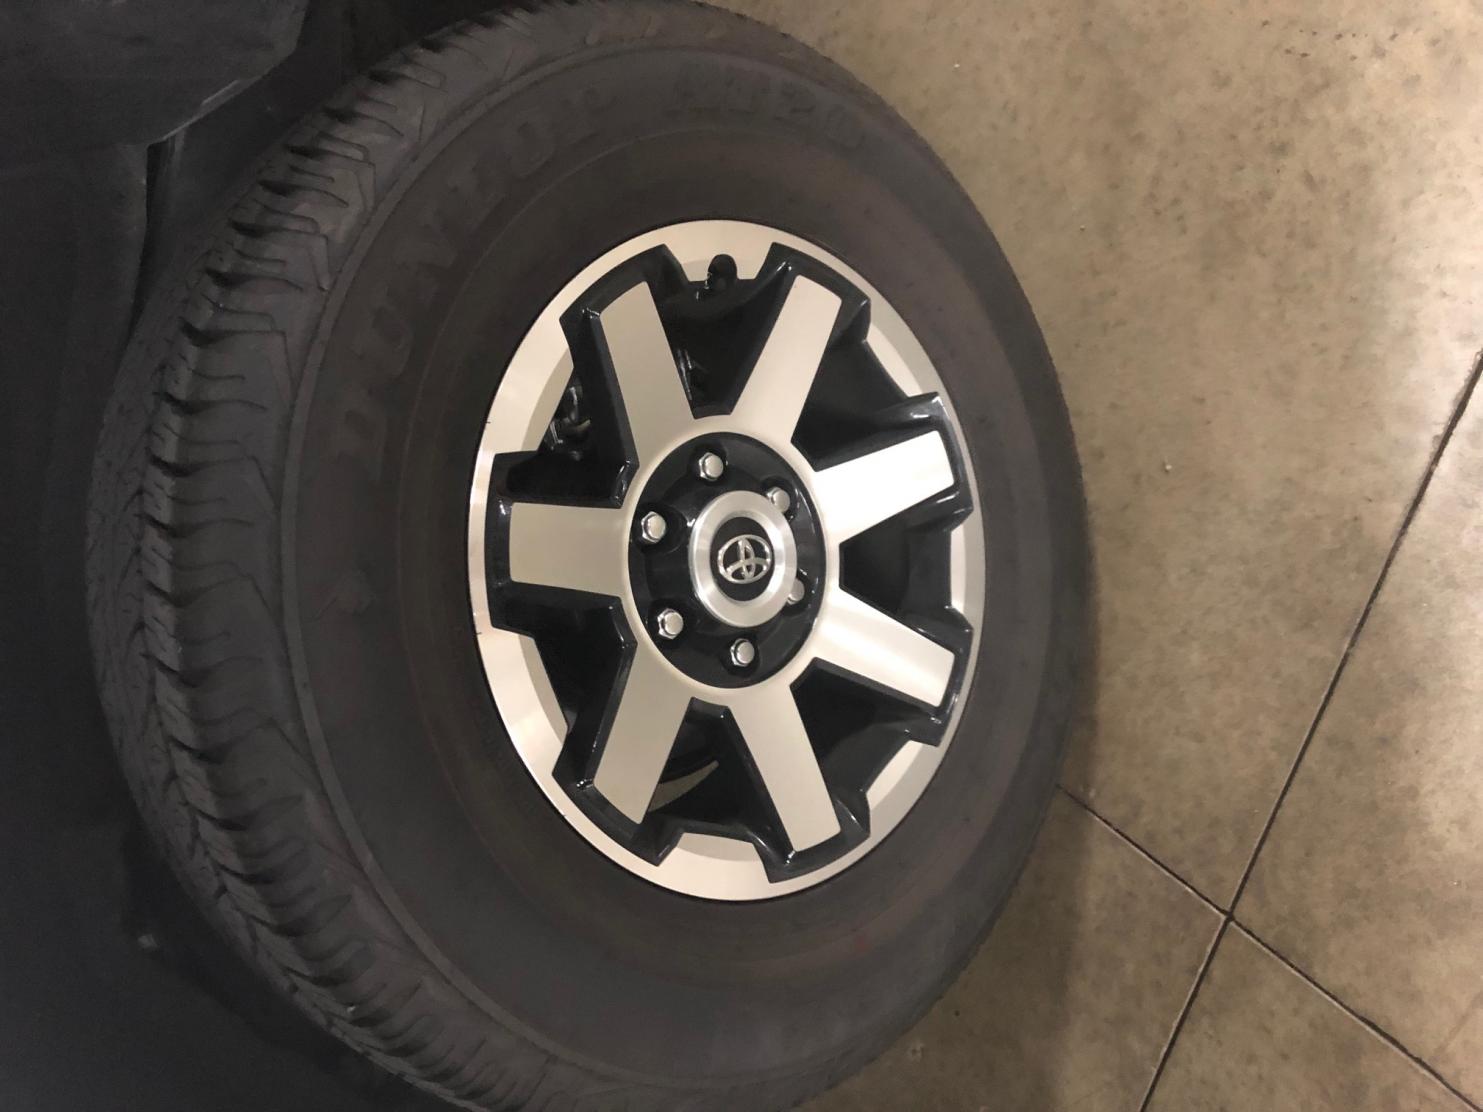 For Sale: 2019 TRD Off Road Premium Wheels and Tires - 0 (Chicago, IL)-img_1960-jpg